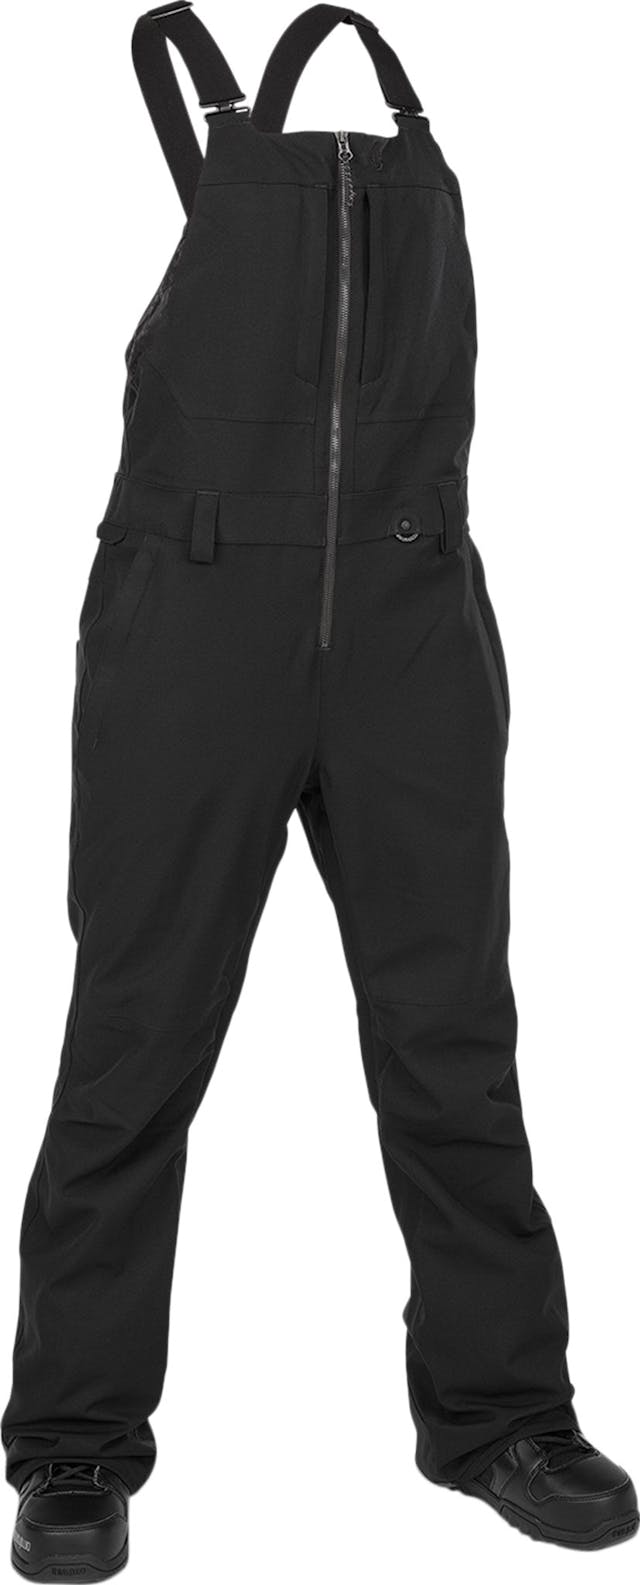 Product image for Swift Bib Overall - Women's